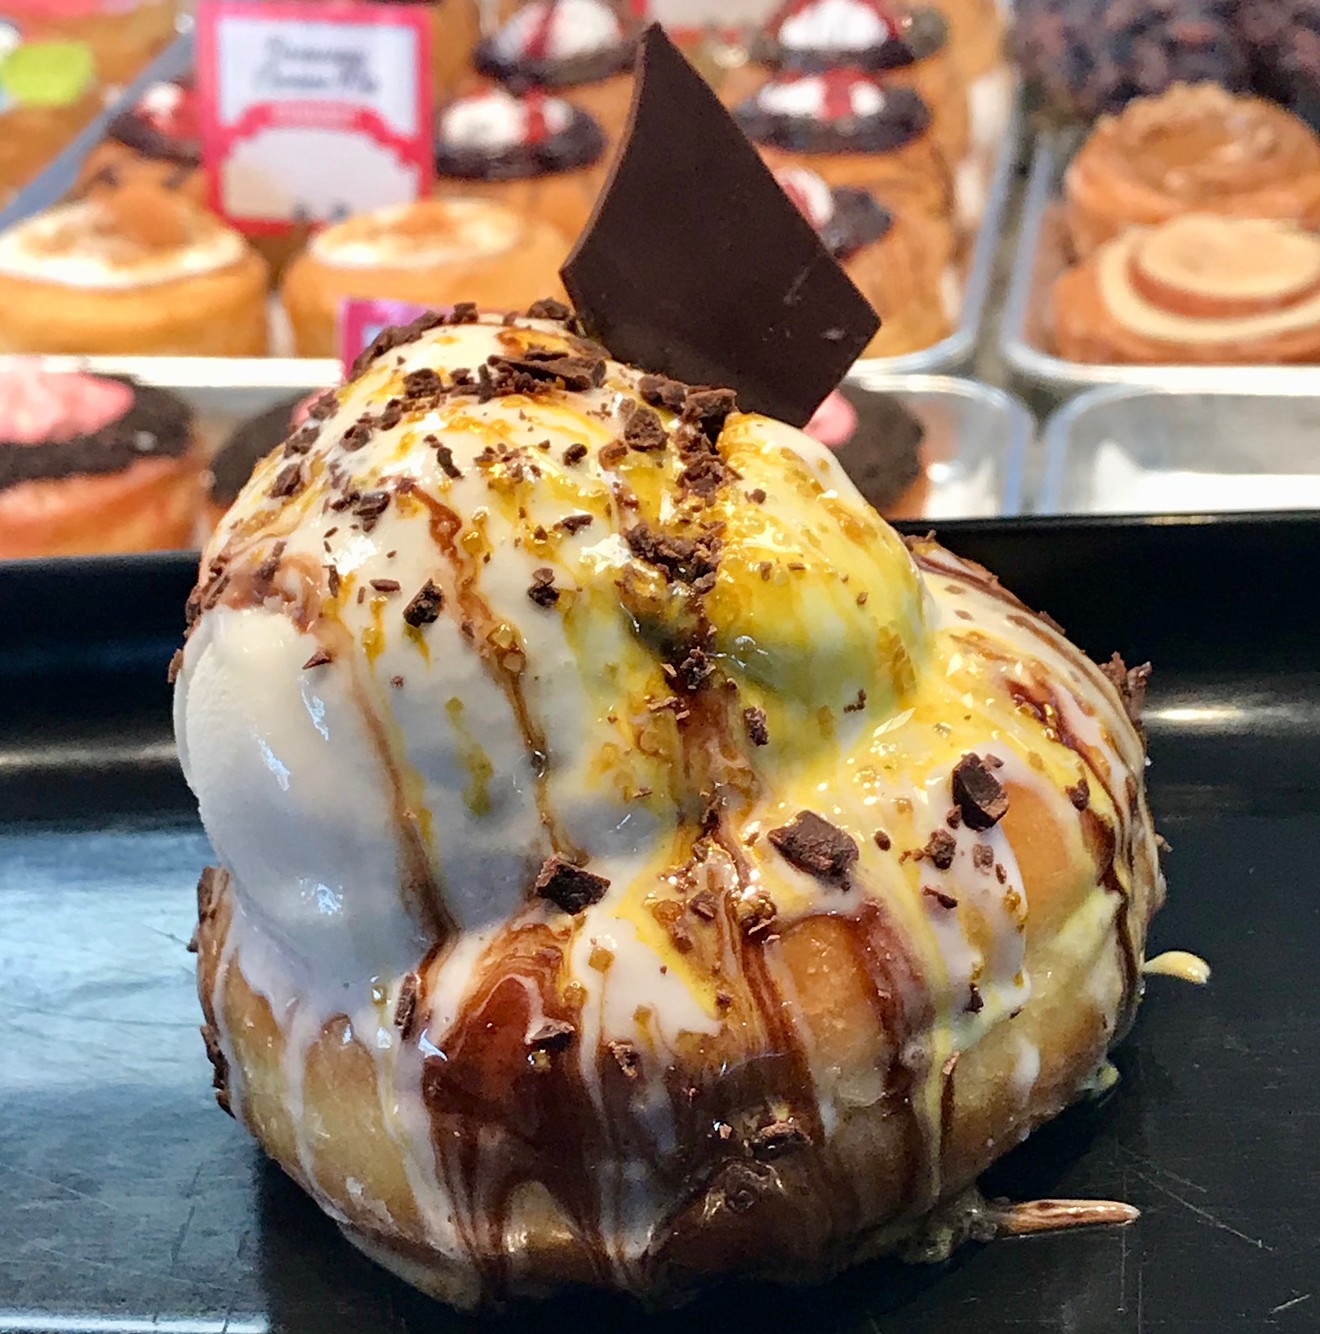 Doughnut-and-ice-cream pairings are available at Mojo in Westchester.